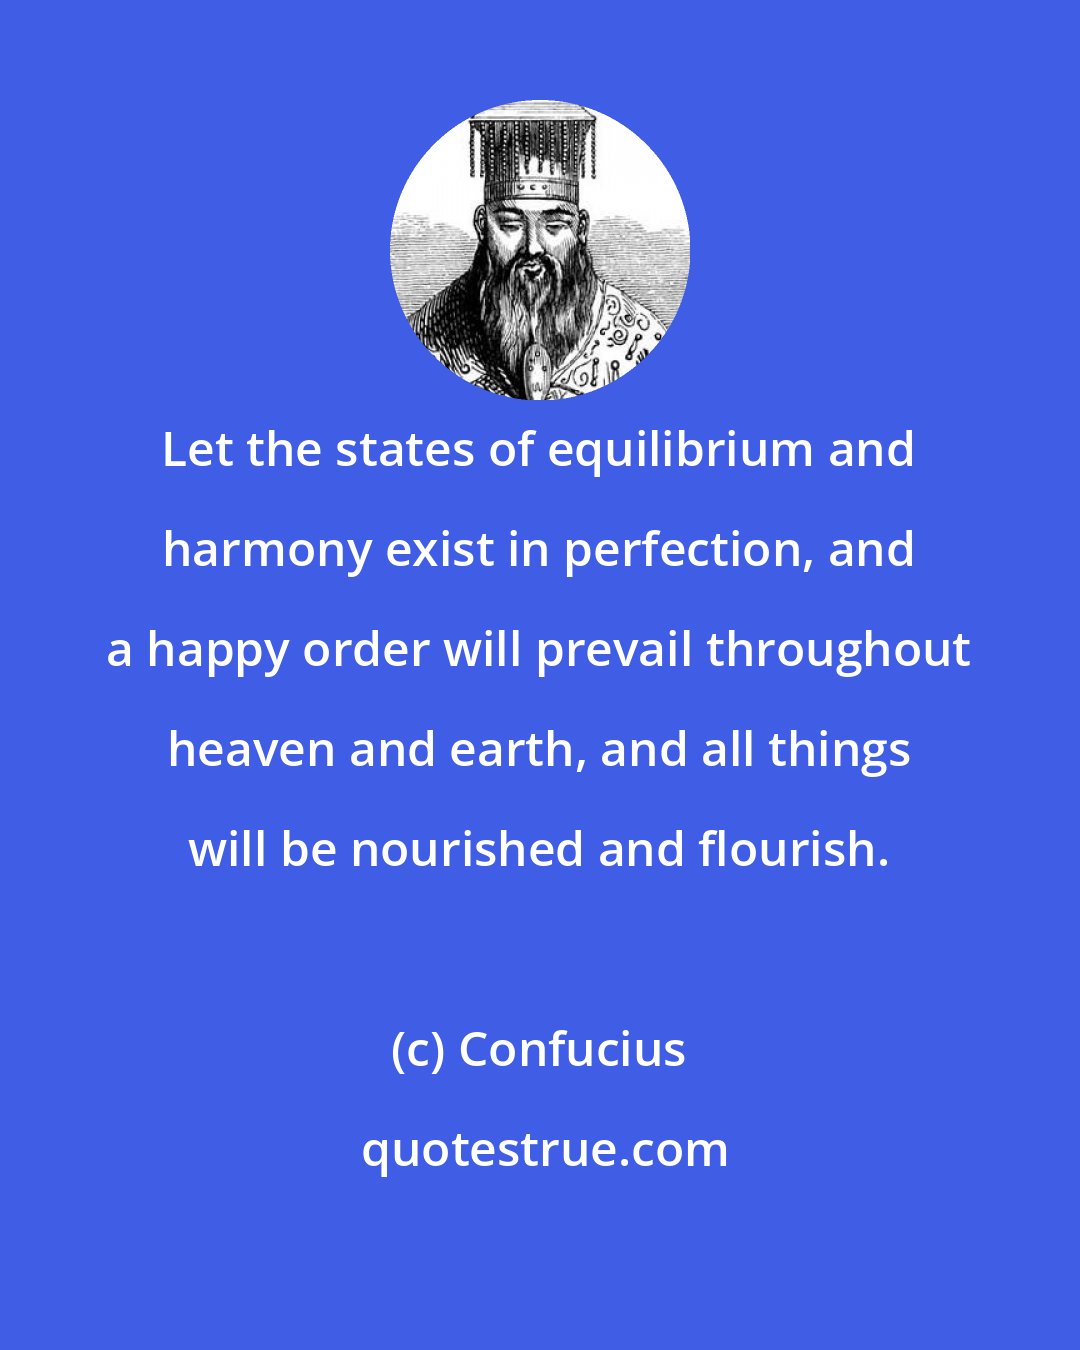 Confucius: Let the states of equilibrium and harmony exist in perfection, and a happy order will prevail throughout heaven and earth, and all things will be nourished and flourish.